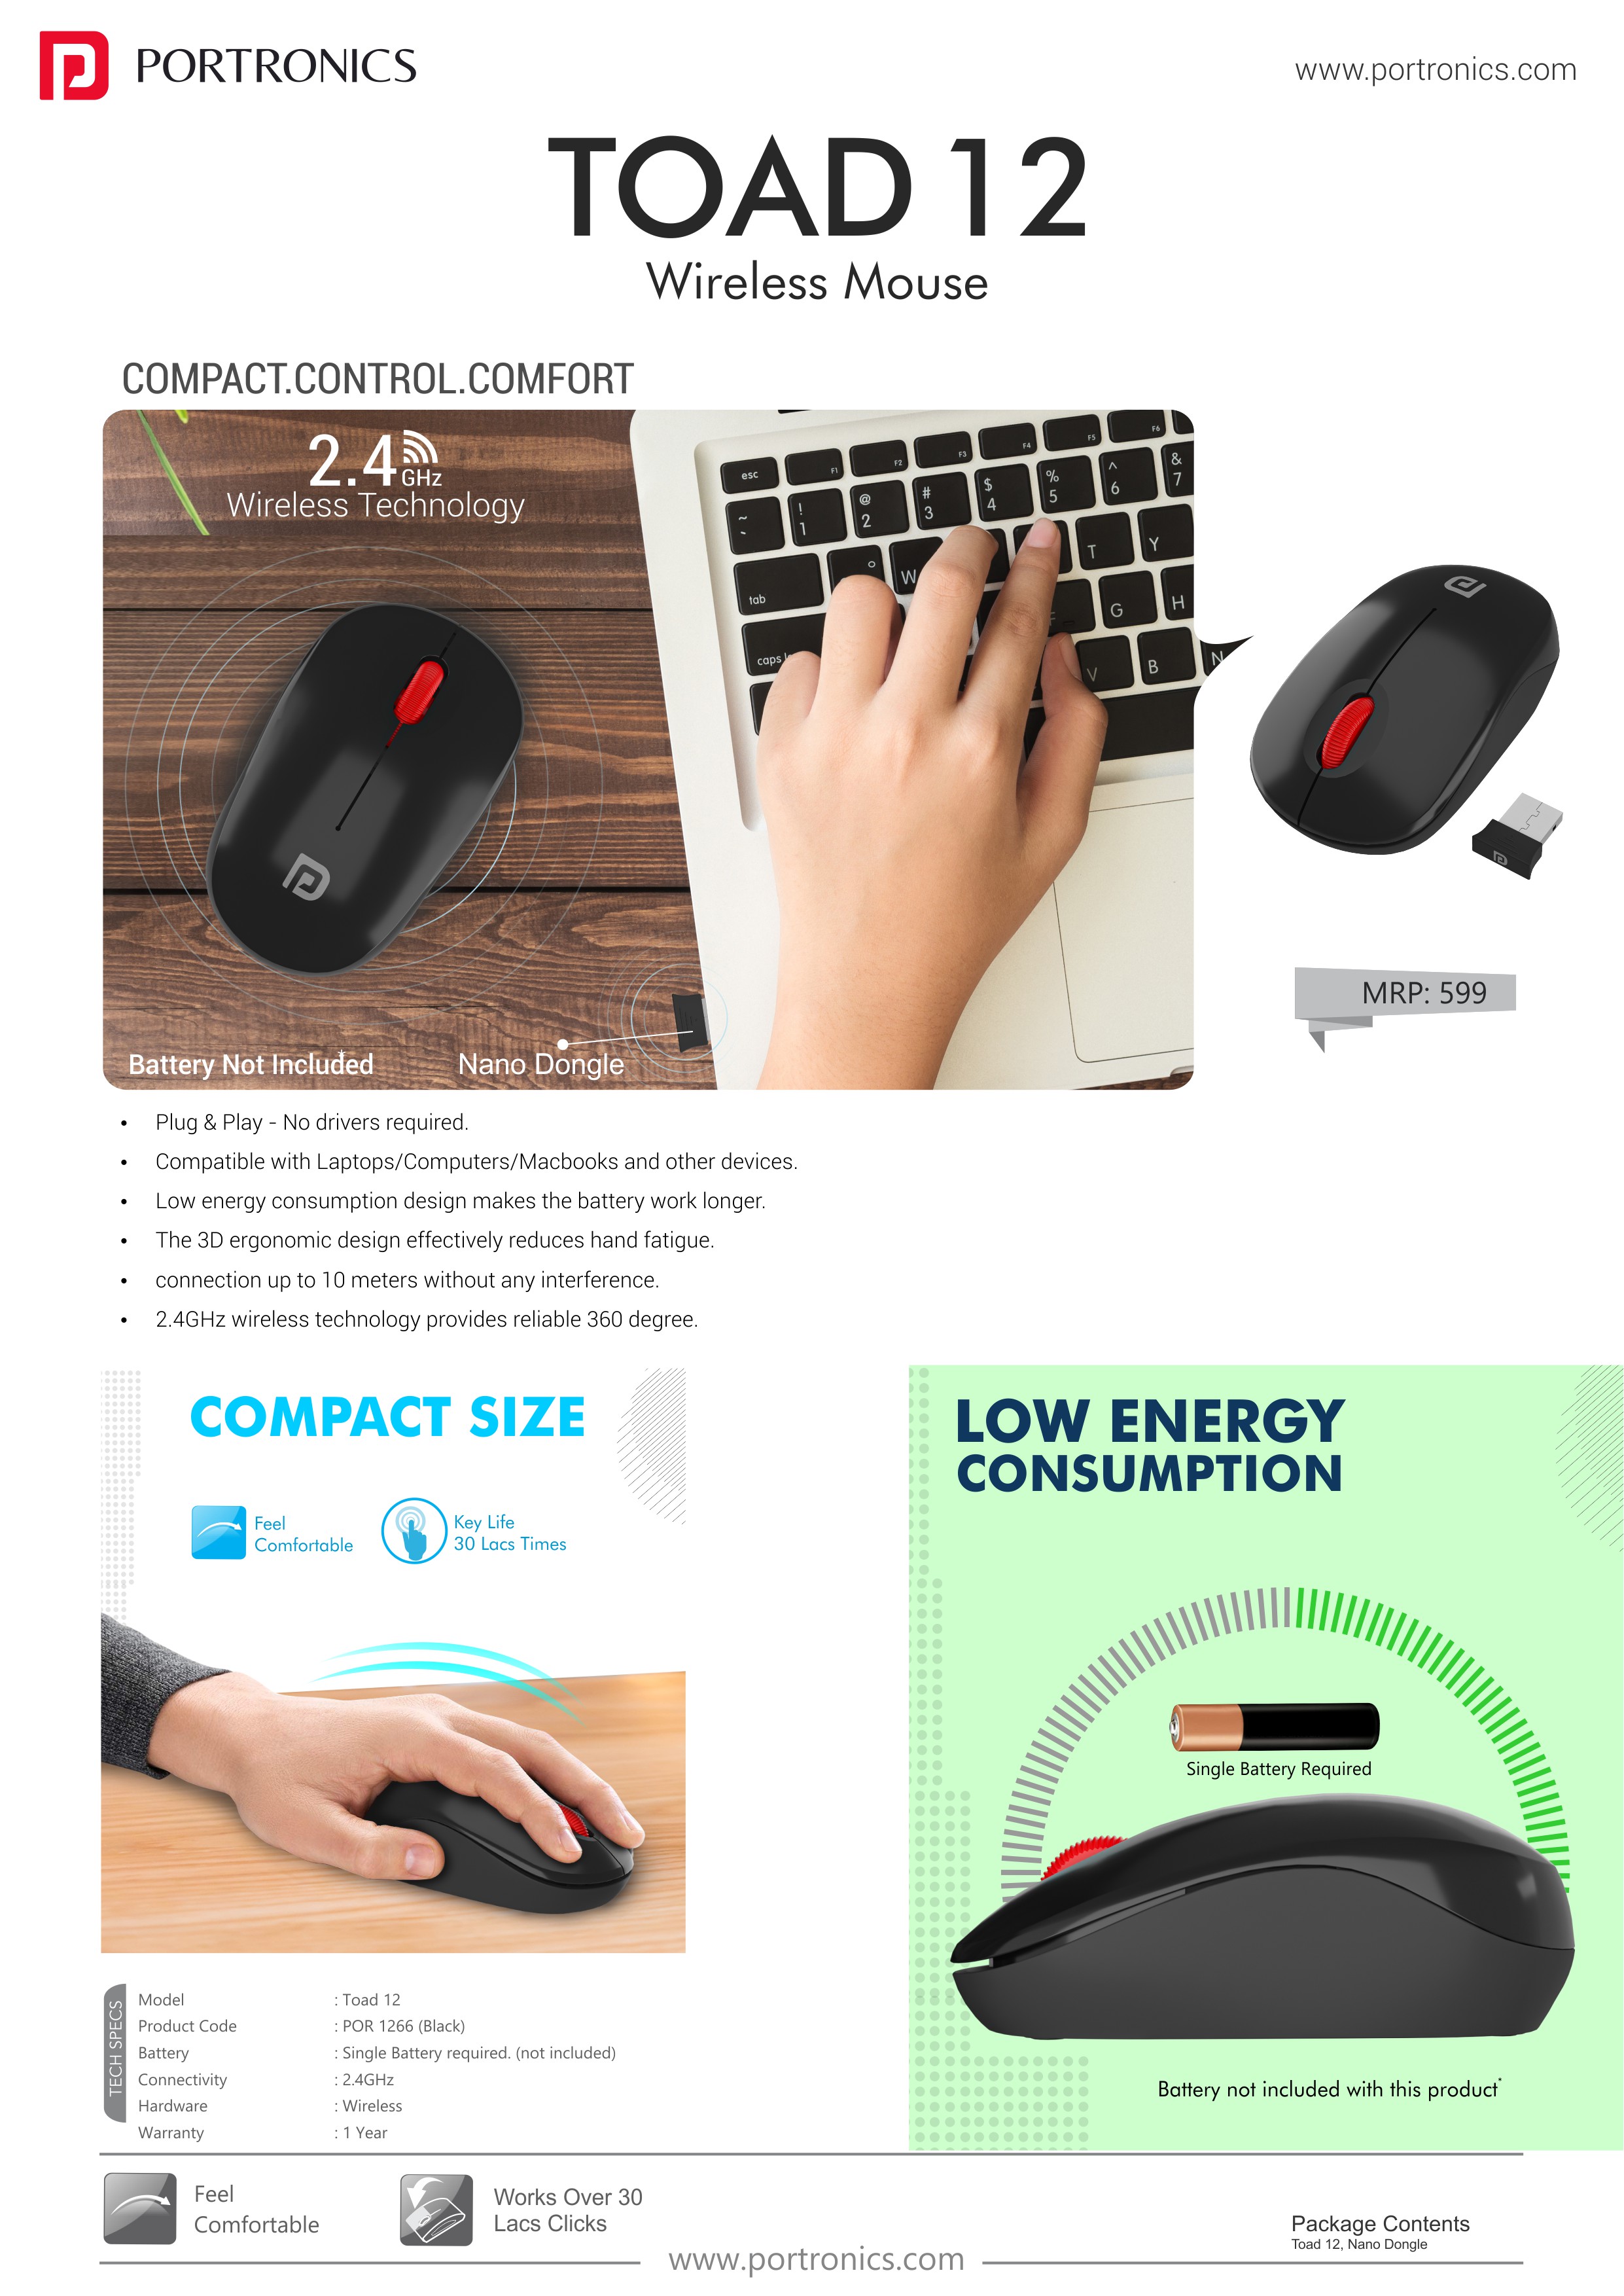 Portronics Toad 12-Wireless Optical Mouse